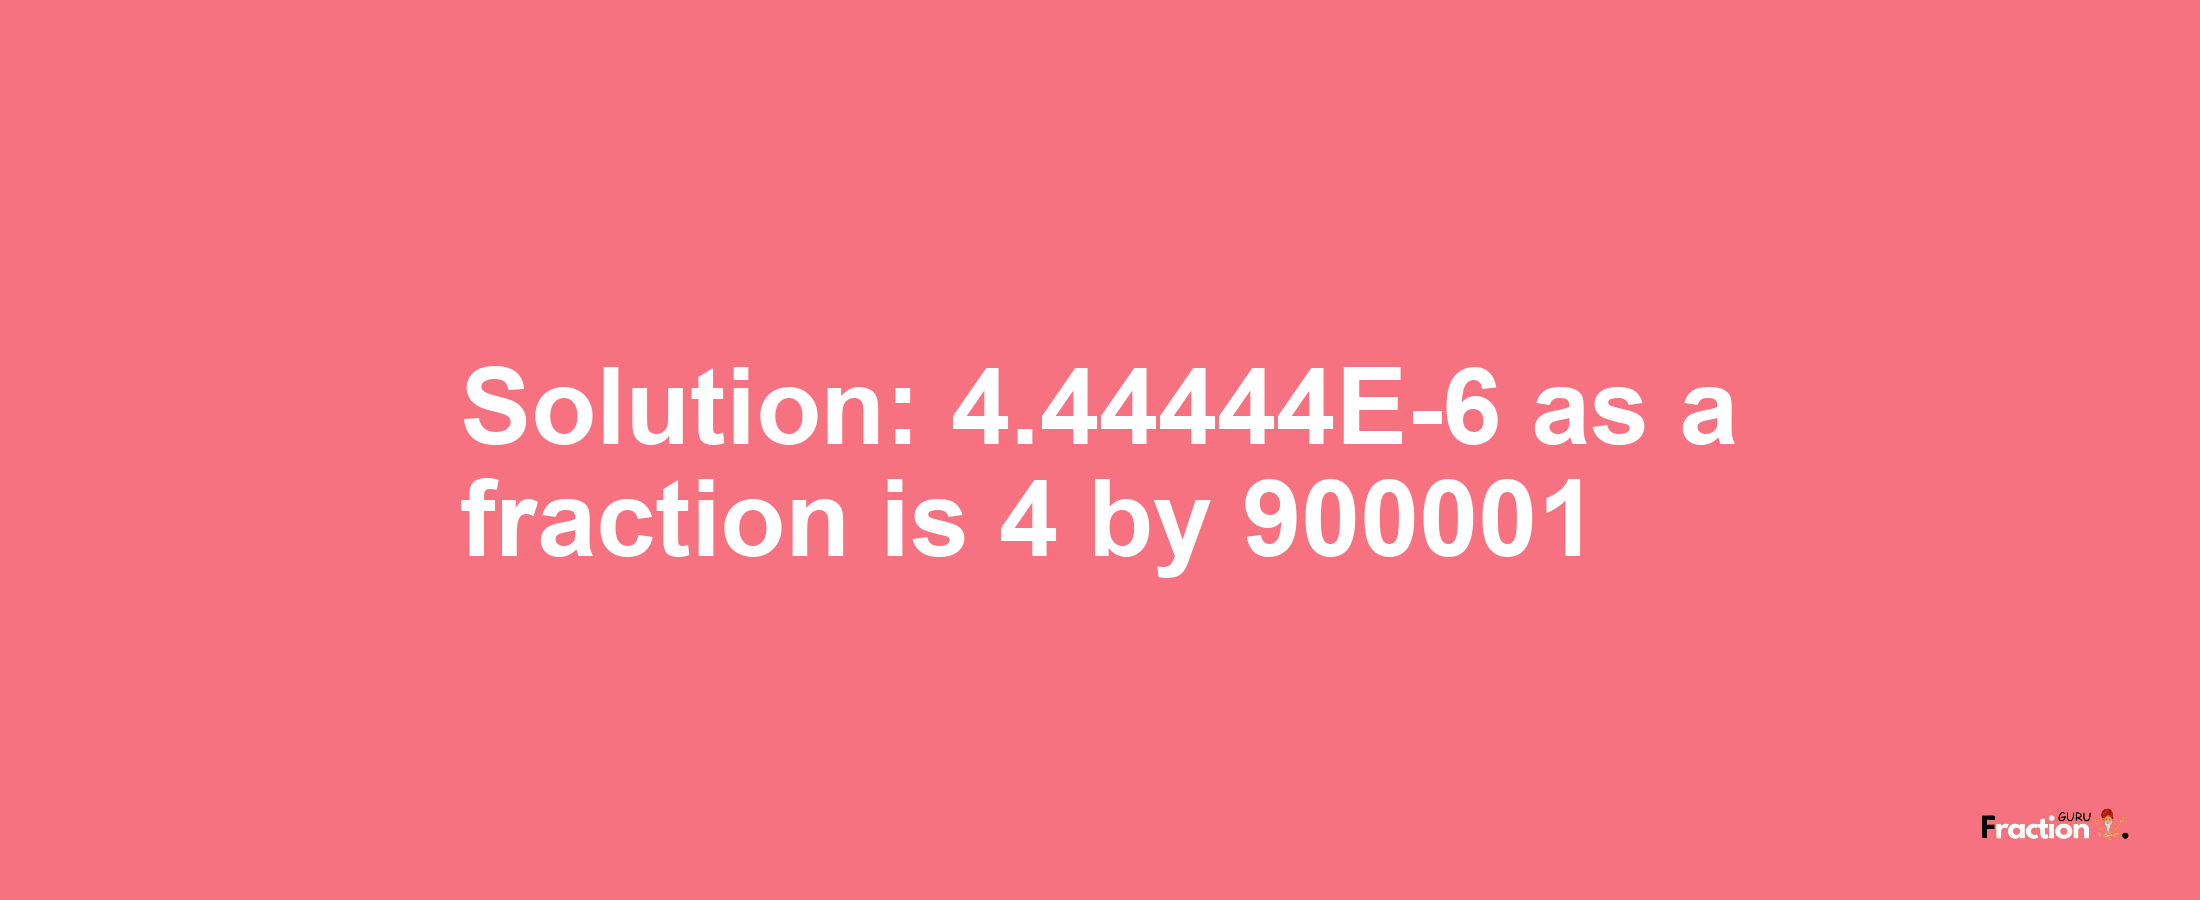 Solution:4.44444E-6 as a fraction is 4/900001